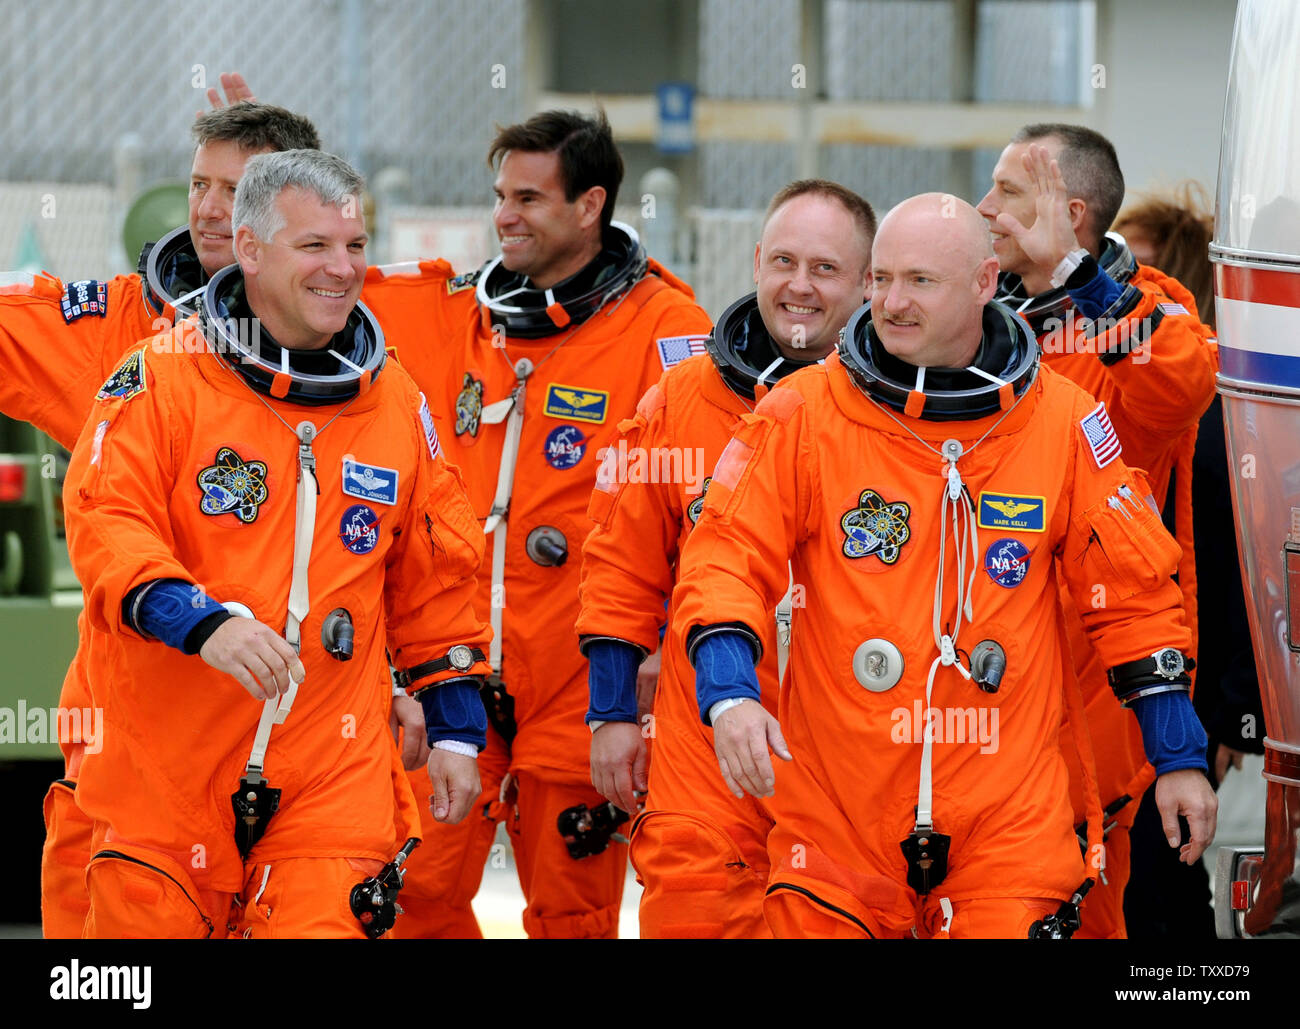 Space Shuttle Endeavour Commander Mark Kelly (right) and Pilot Greg Johnson (right) lead their crew to the Astrovan on their way to the launchpad for Endeavour's last flight at Kennedy Space Center on April 29, 2011.  The launch attempt was scrubbed minutes later. Behind Kelly and Johnson are mission specialists  (L-R) Roberto Vittori, Greg Chamitoff, Mike Finke and Drew Feustel.  Kelly is the husband of Arizona Congresswoman Gabrielle Giffords, who was recovering from an assassination attempt and at the Cape to watch the possible liftoff.   UPI/ Pat Benic Stock Photo